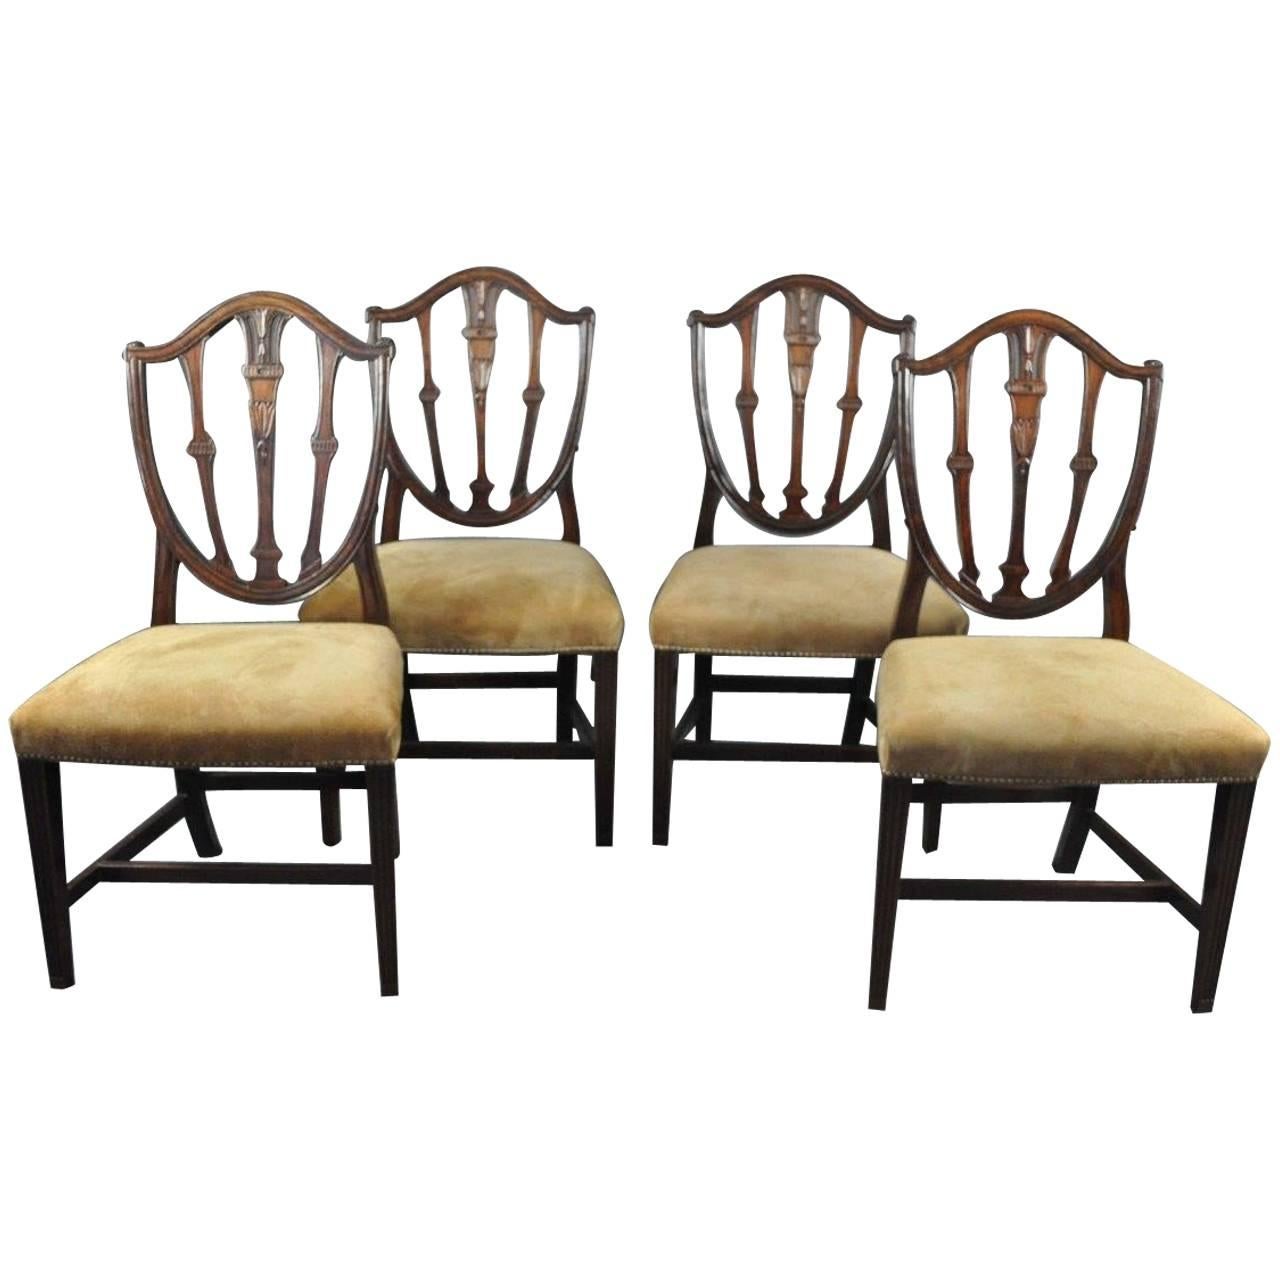 Set of Four 18th Century Gillows Mahogany Dining Chairs For Sale